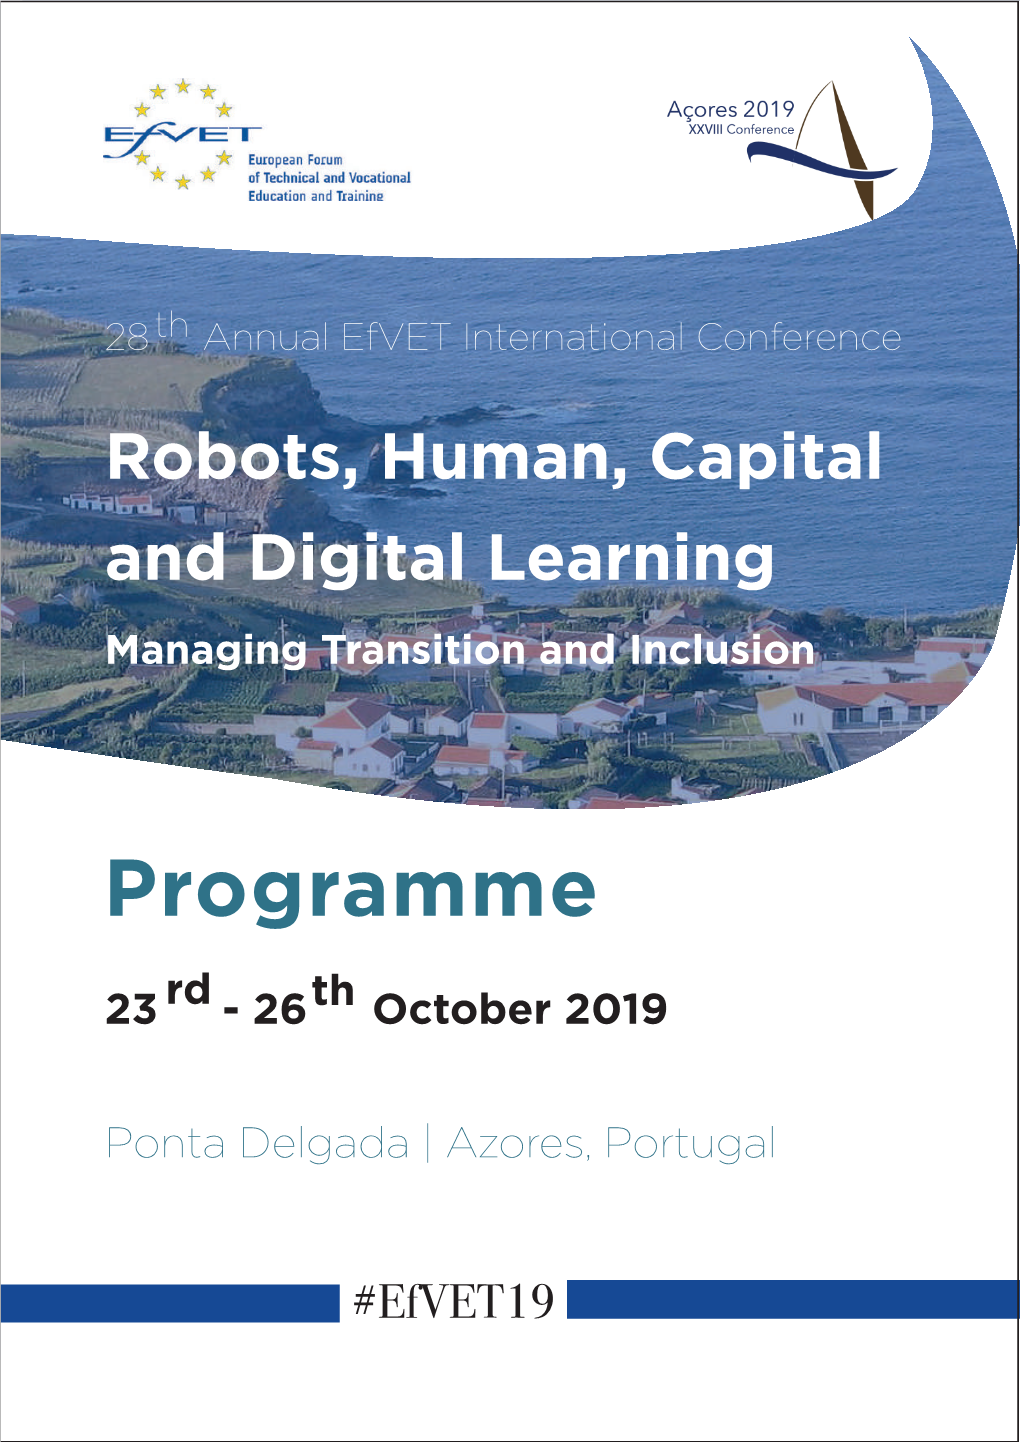 Robots, Human, Capital and Digital Learning Managing Transition and Inclusion